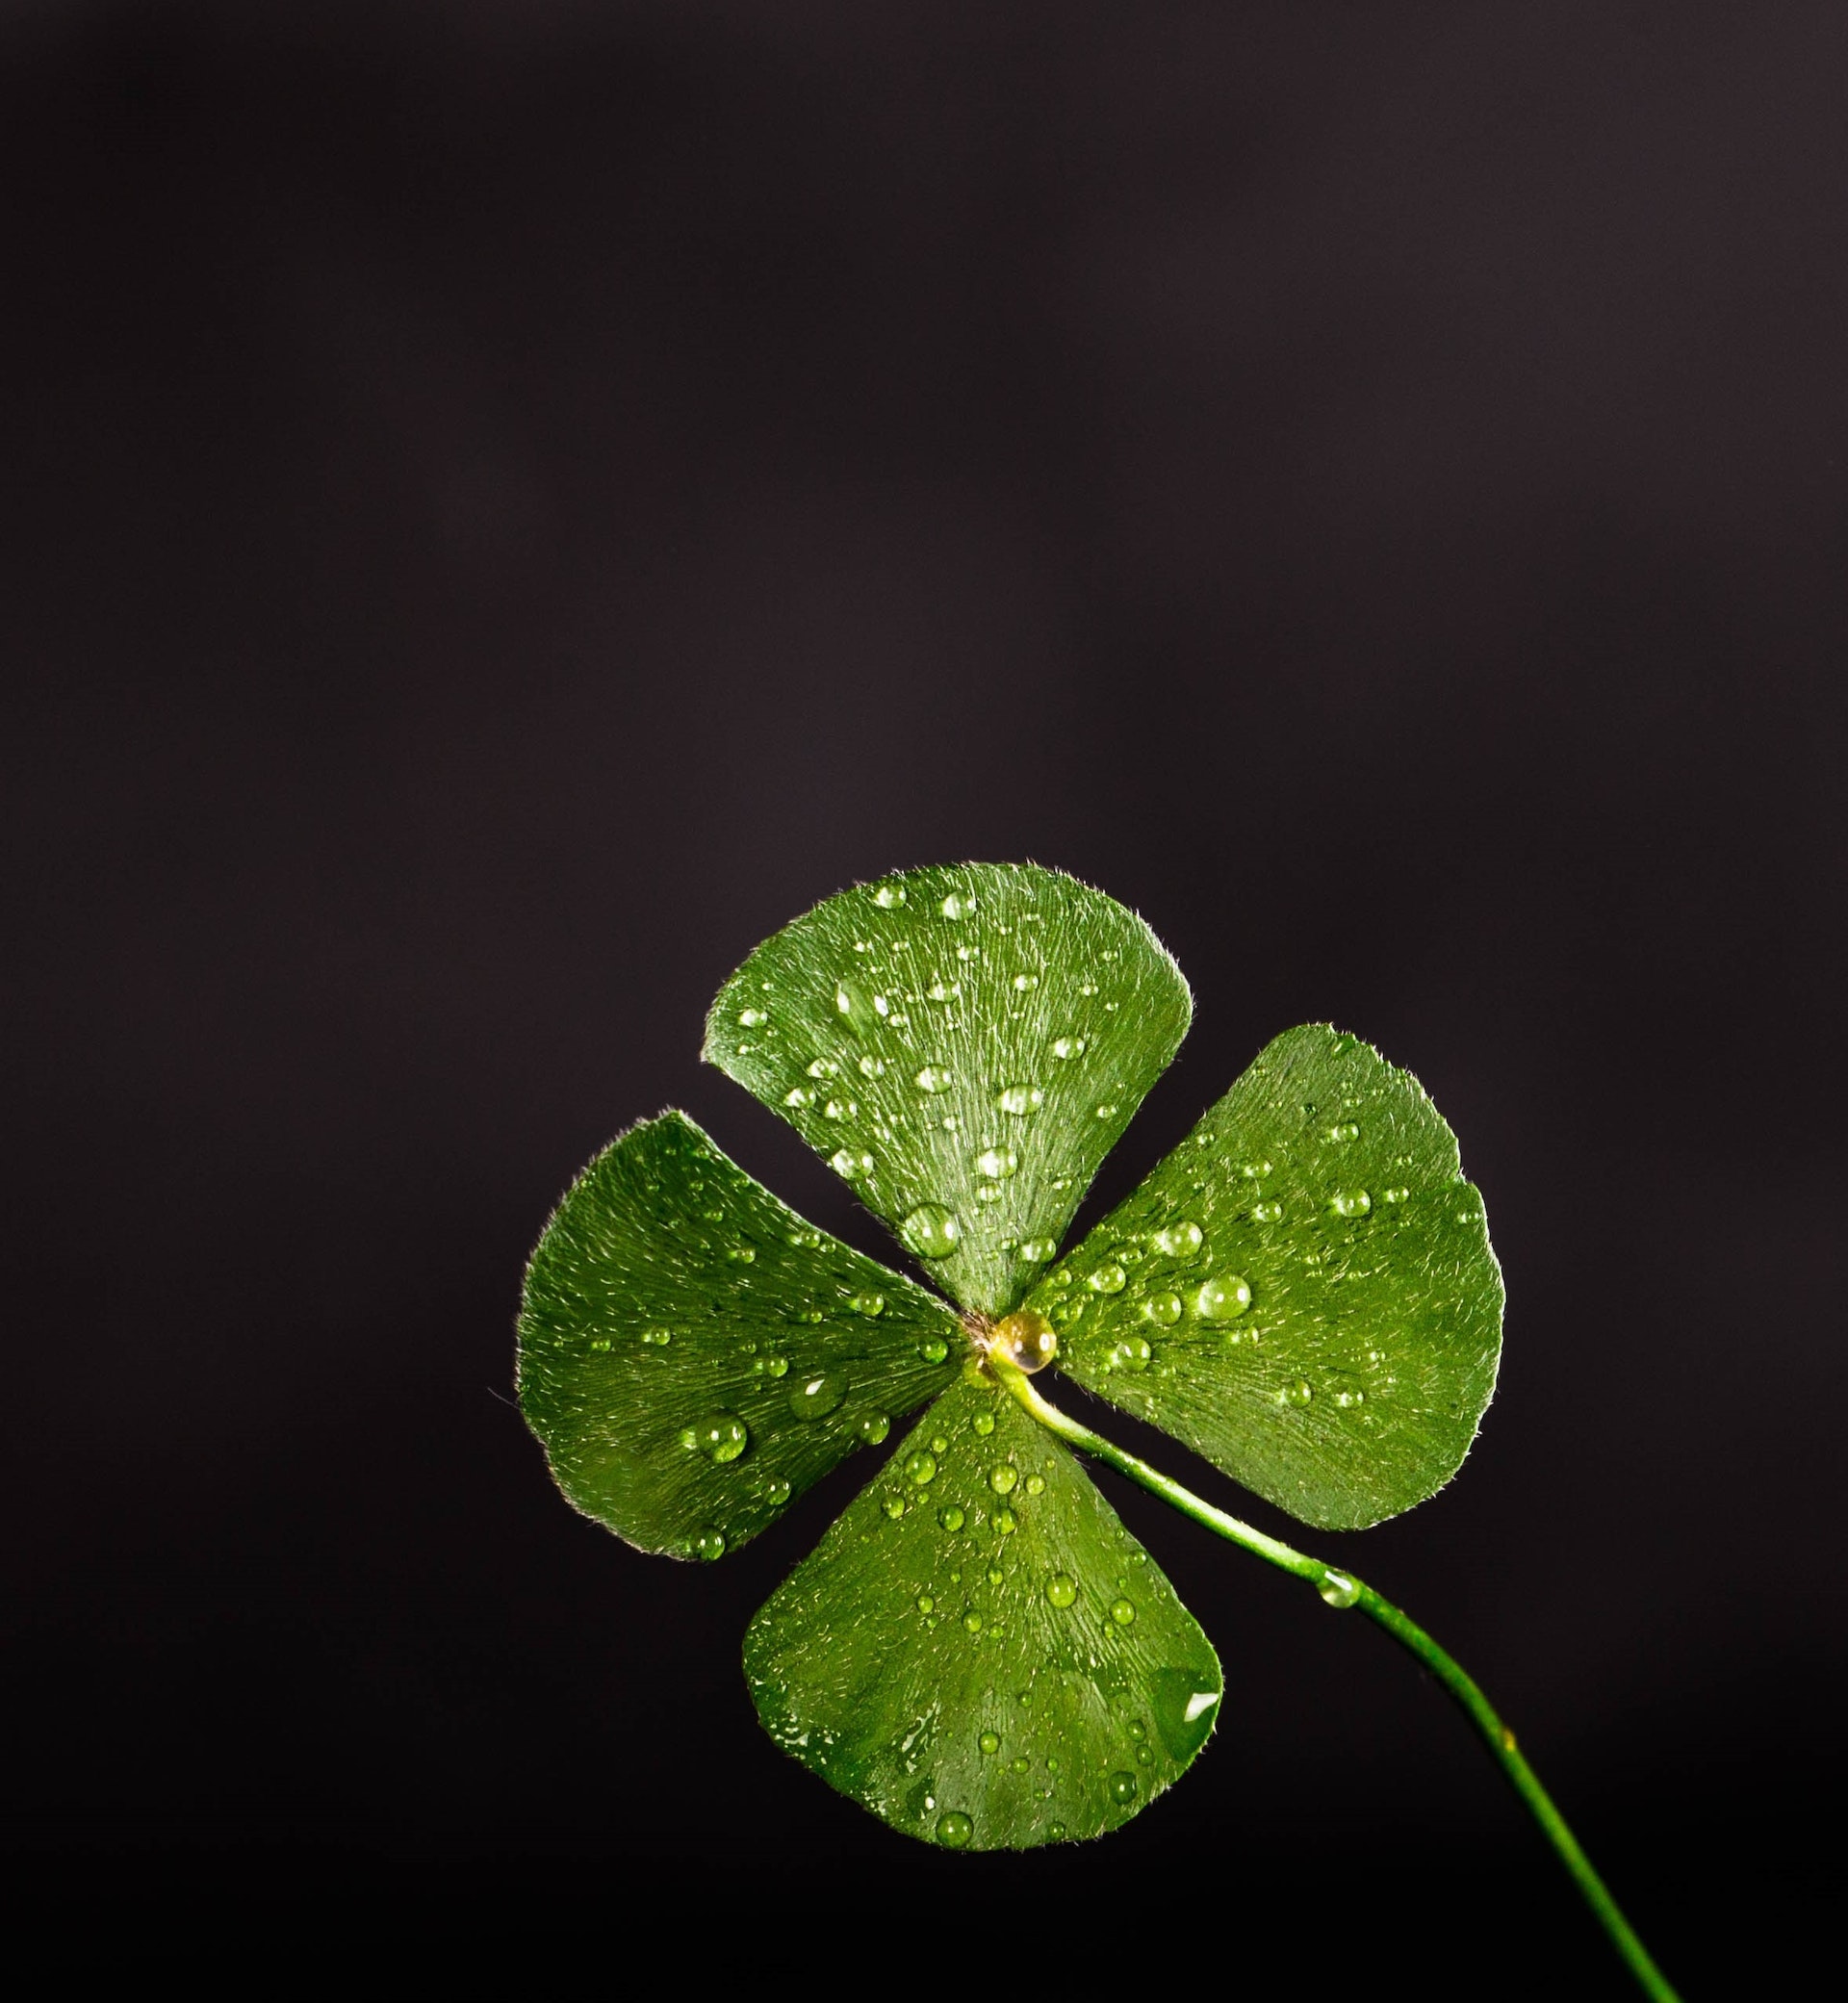 Are there superstitions for increasing luck